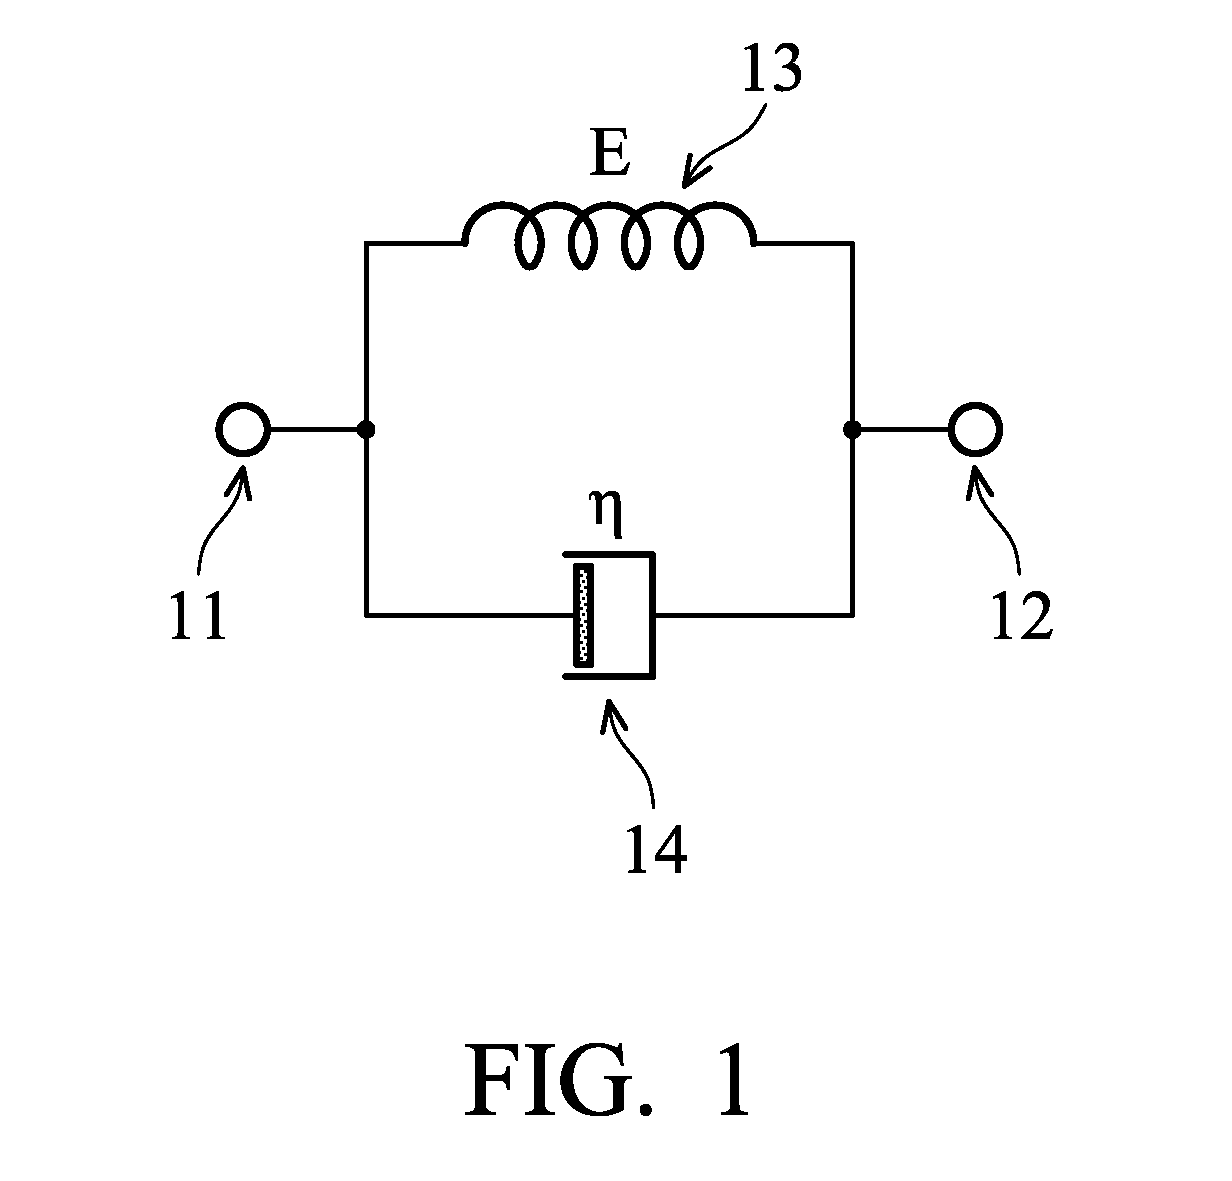 Impact resistant device comprising an optical layer